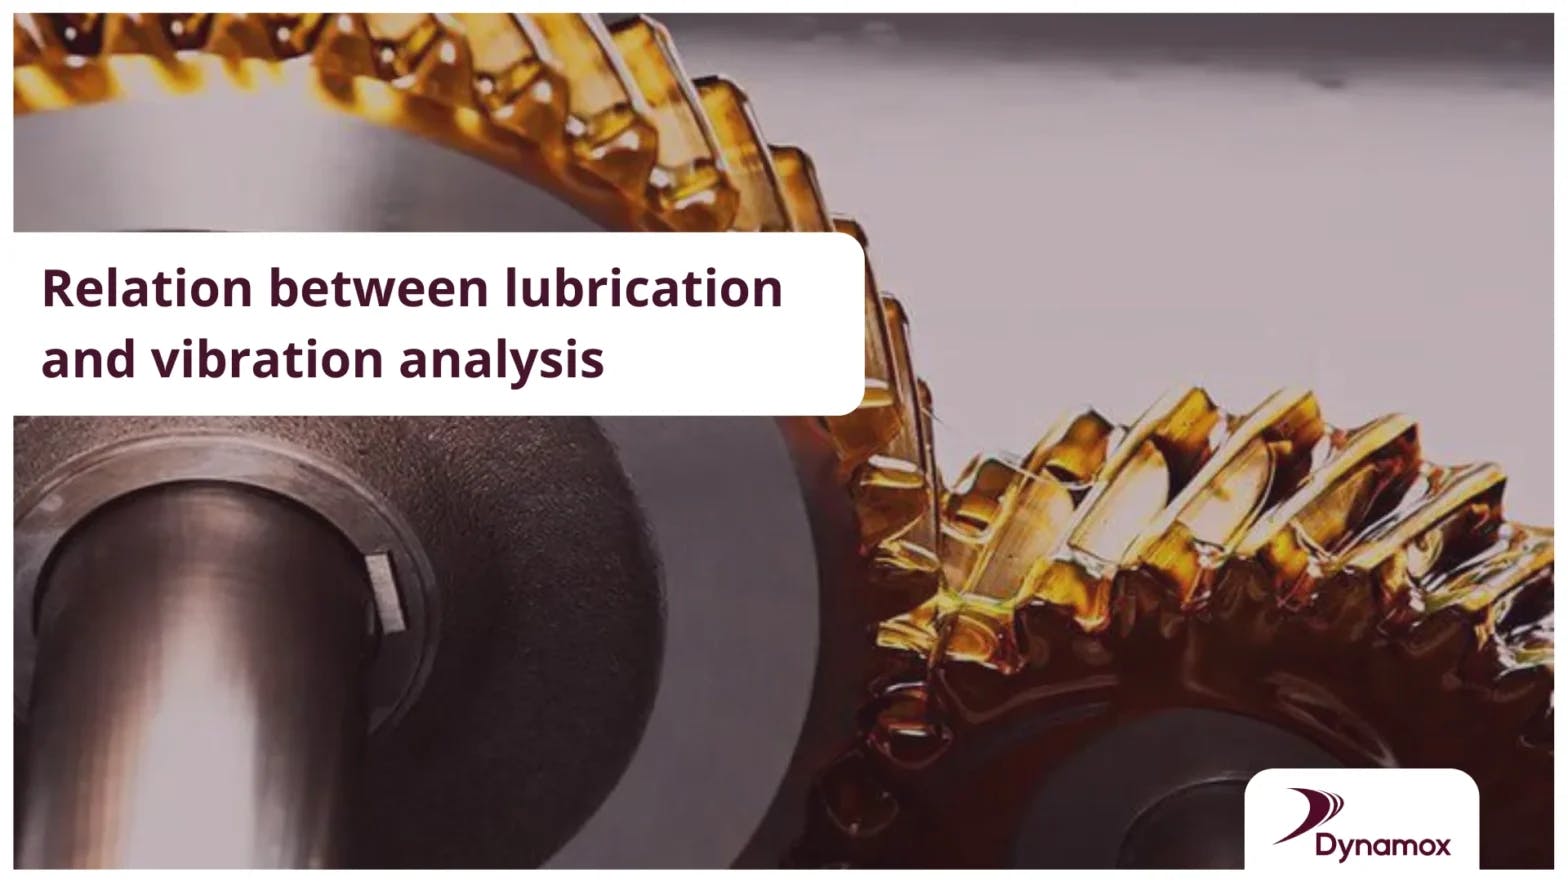 Relation between lubrication and vibration analysis